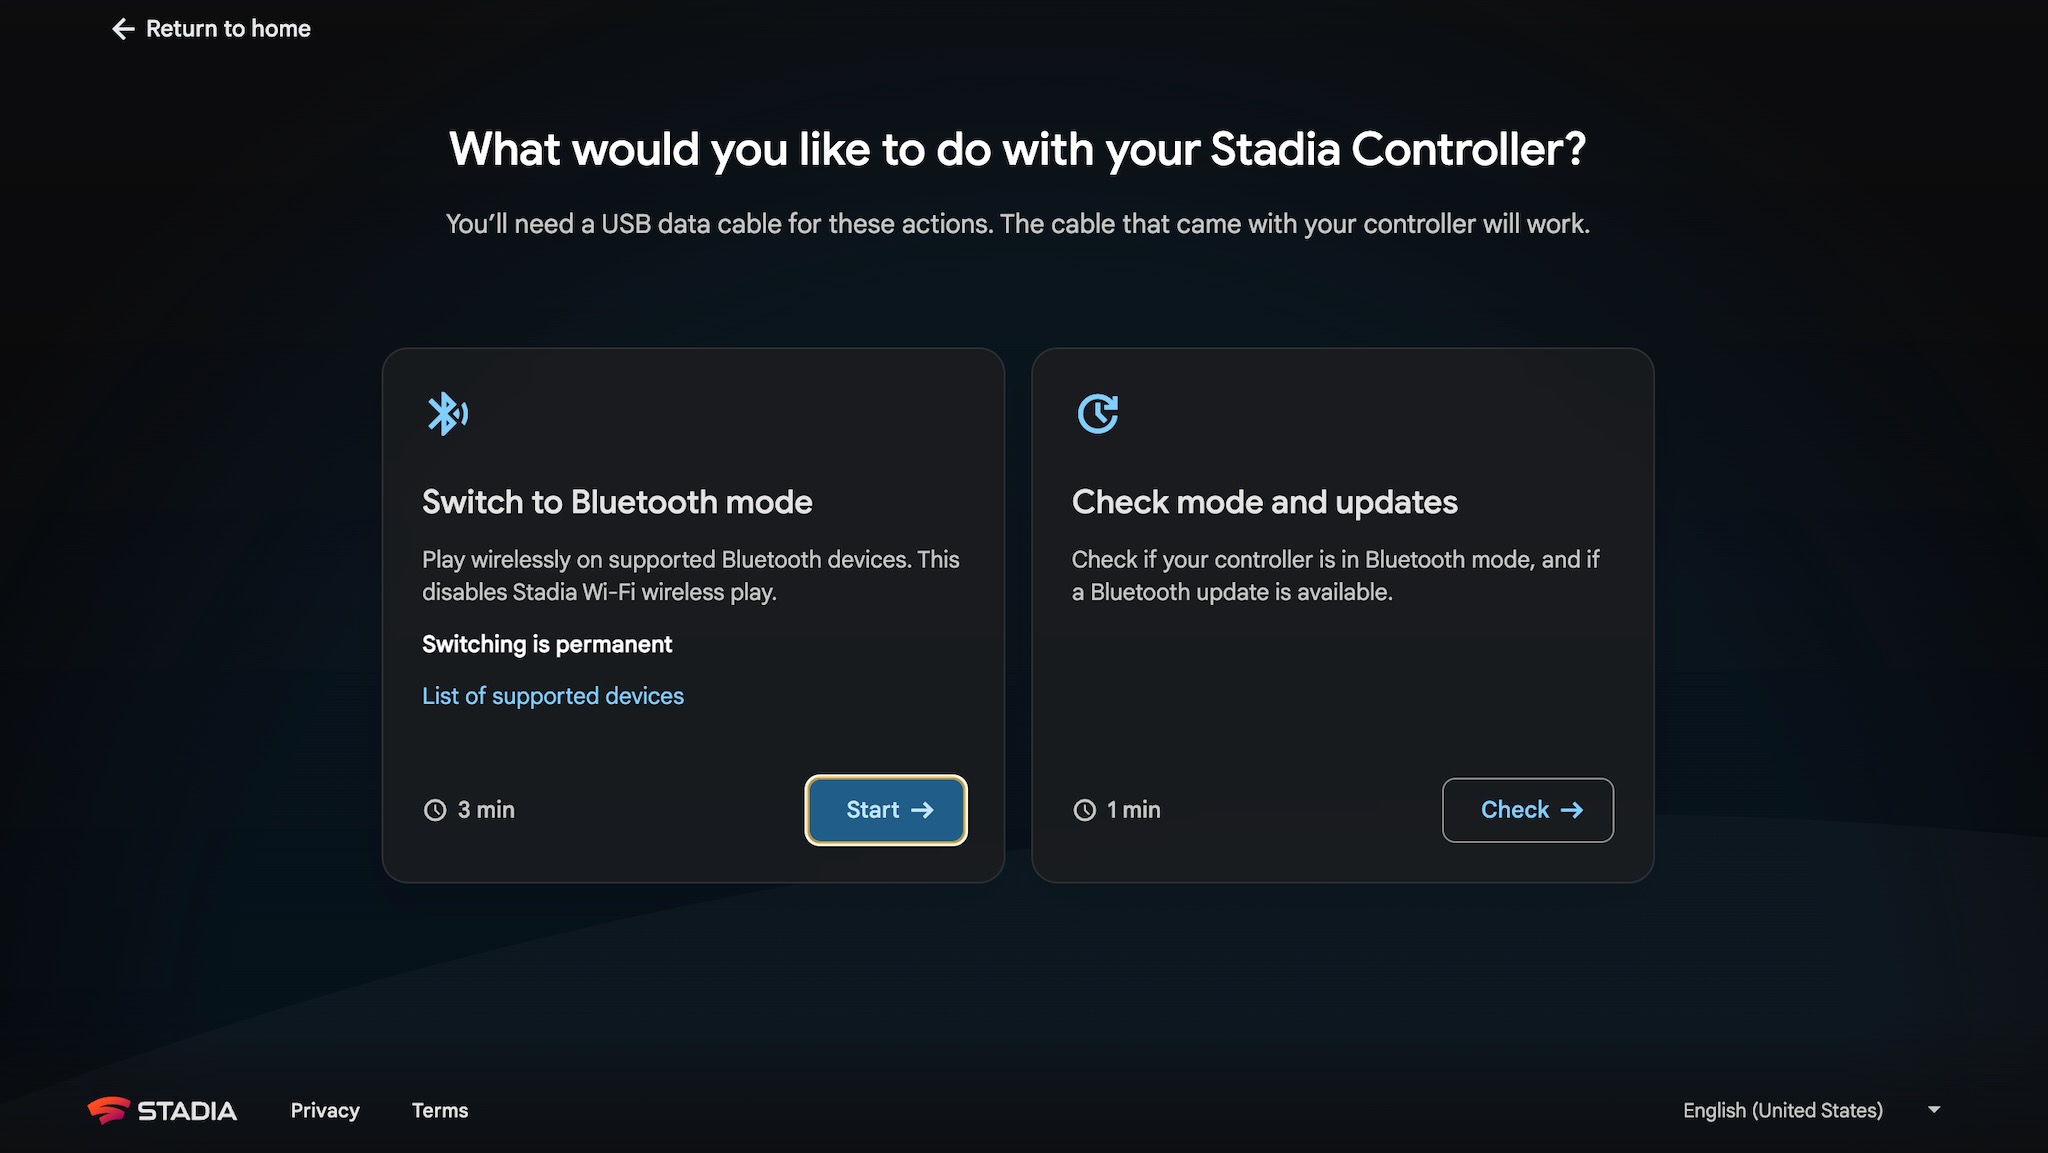 The Stadia Controller firmware browser tool: options to either switch the controller to Bluetooth or check its Bluetooth status.